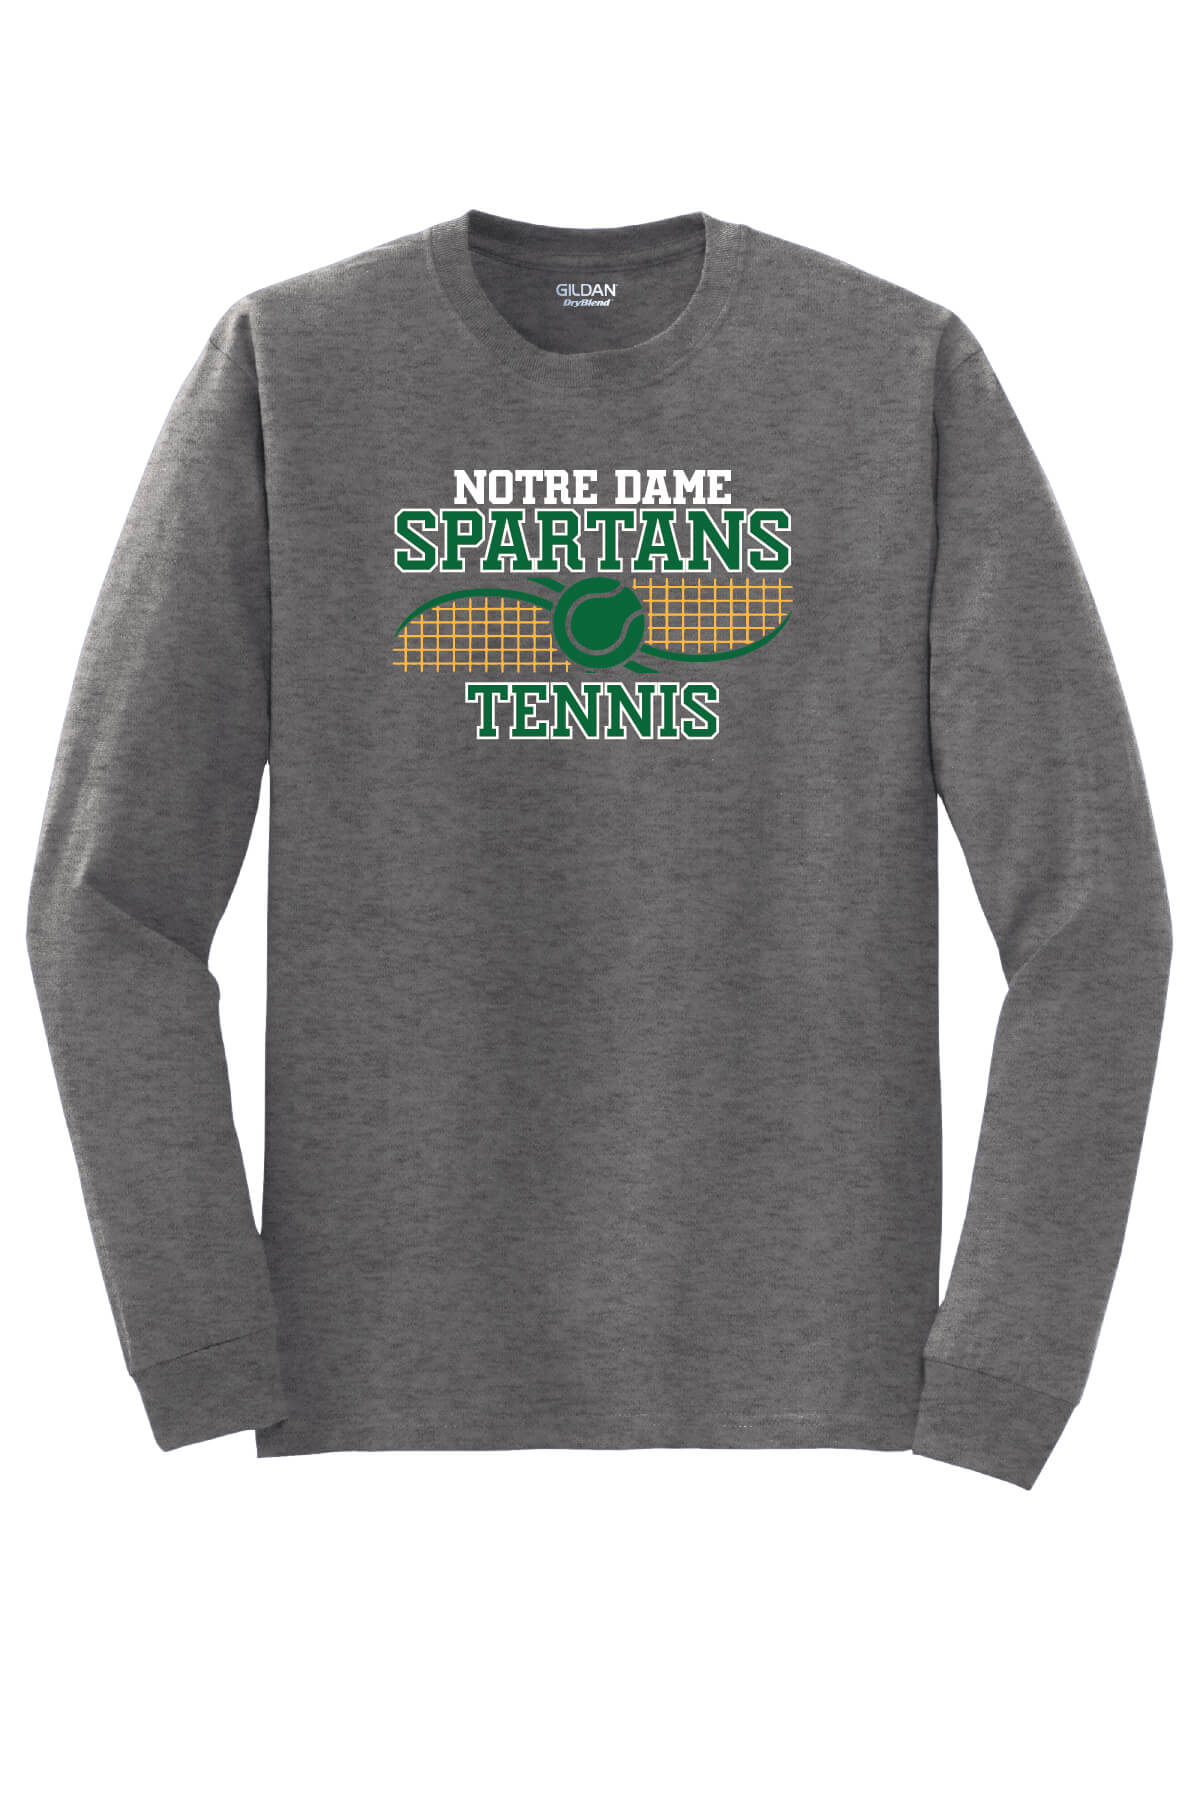 Notre Dame Spartans Long Sleeve T-Shirt gray